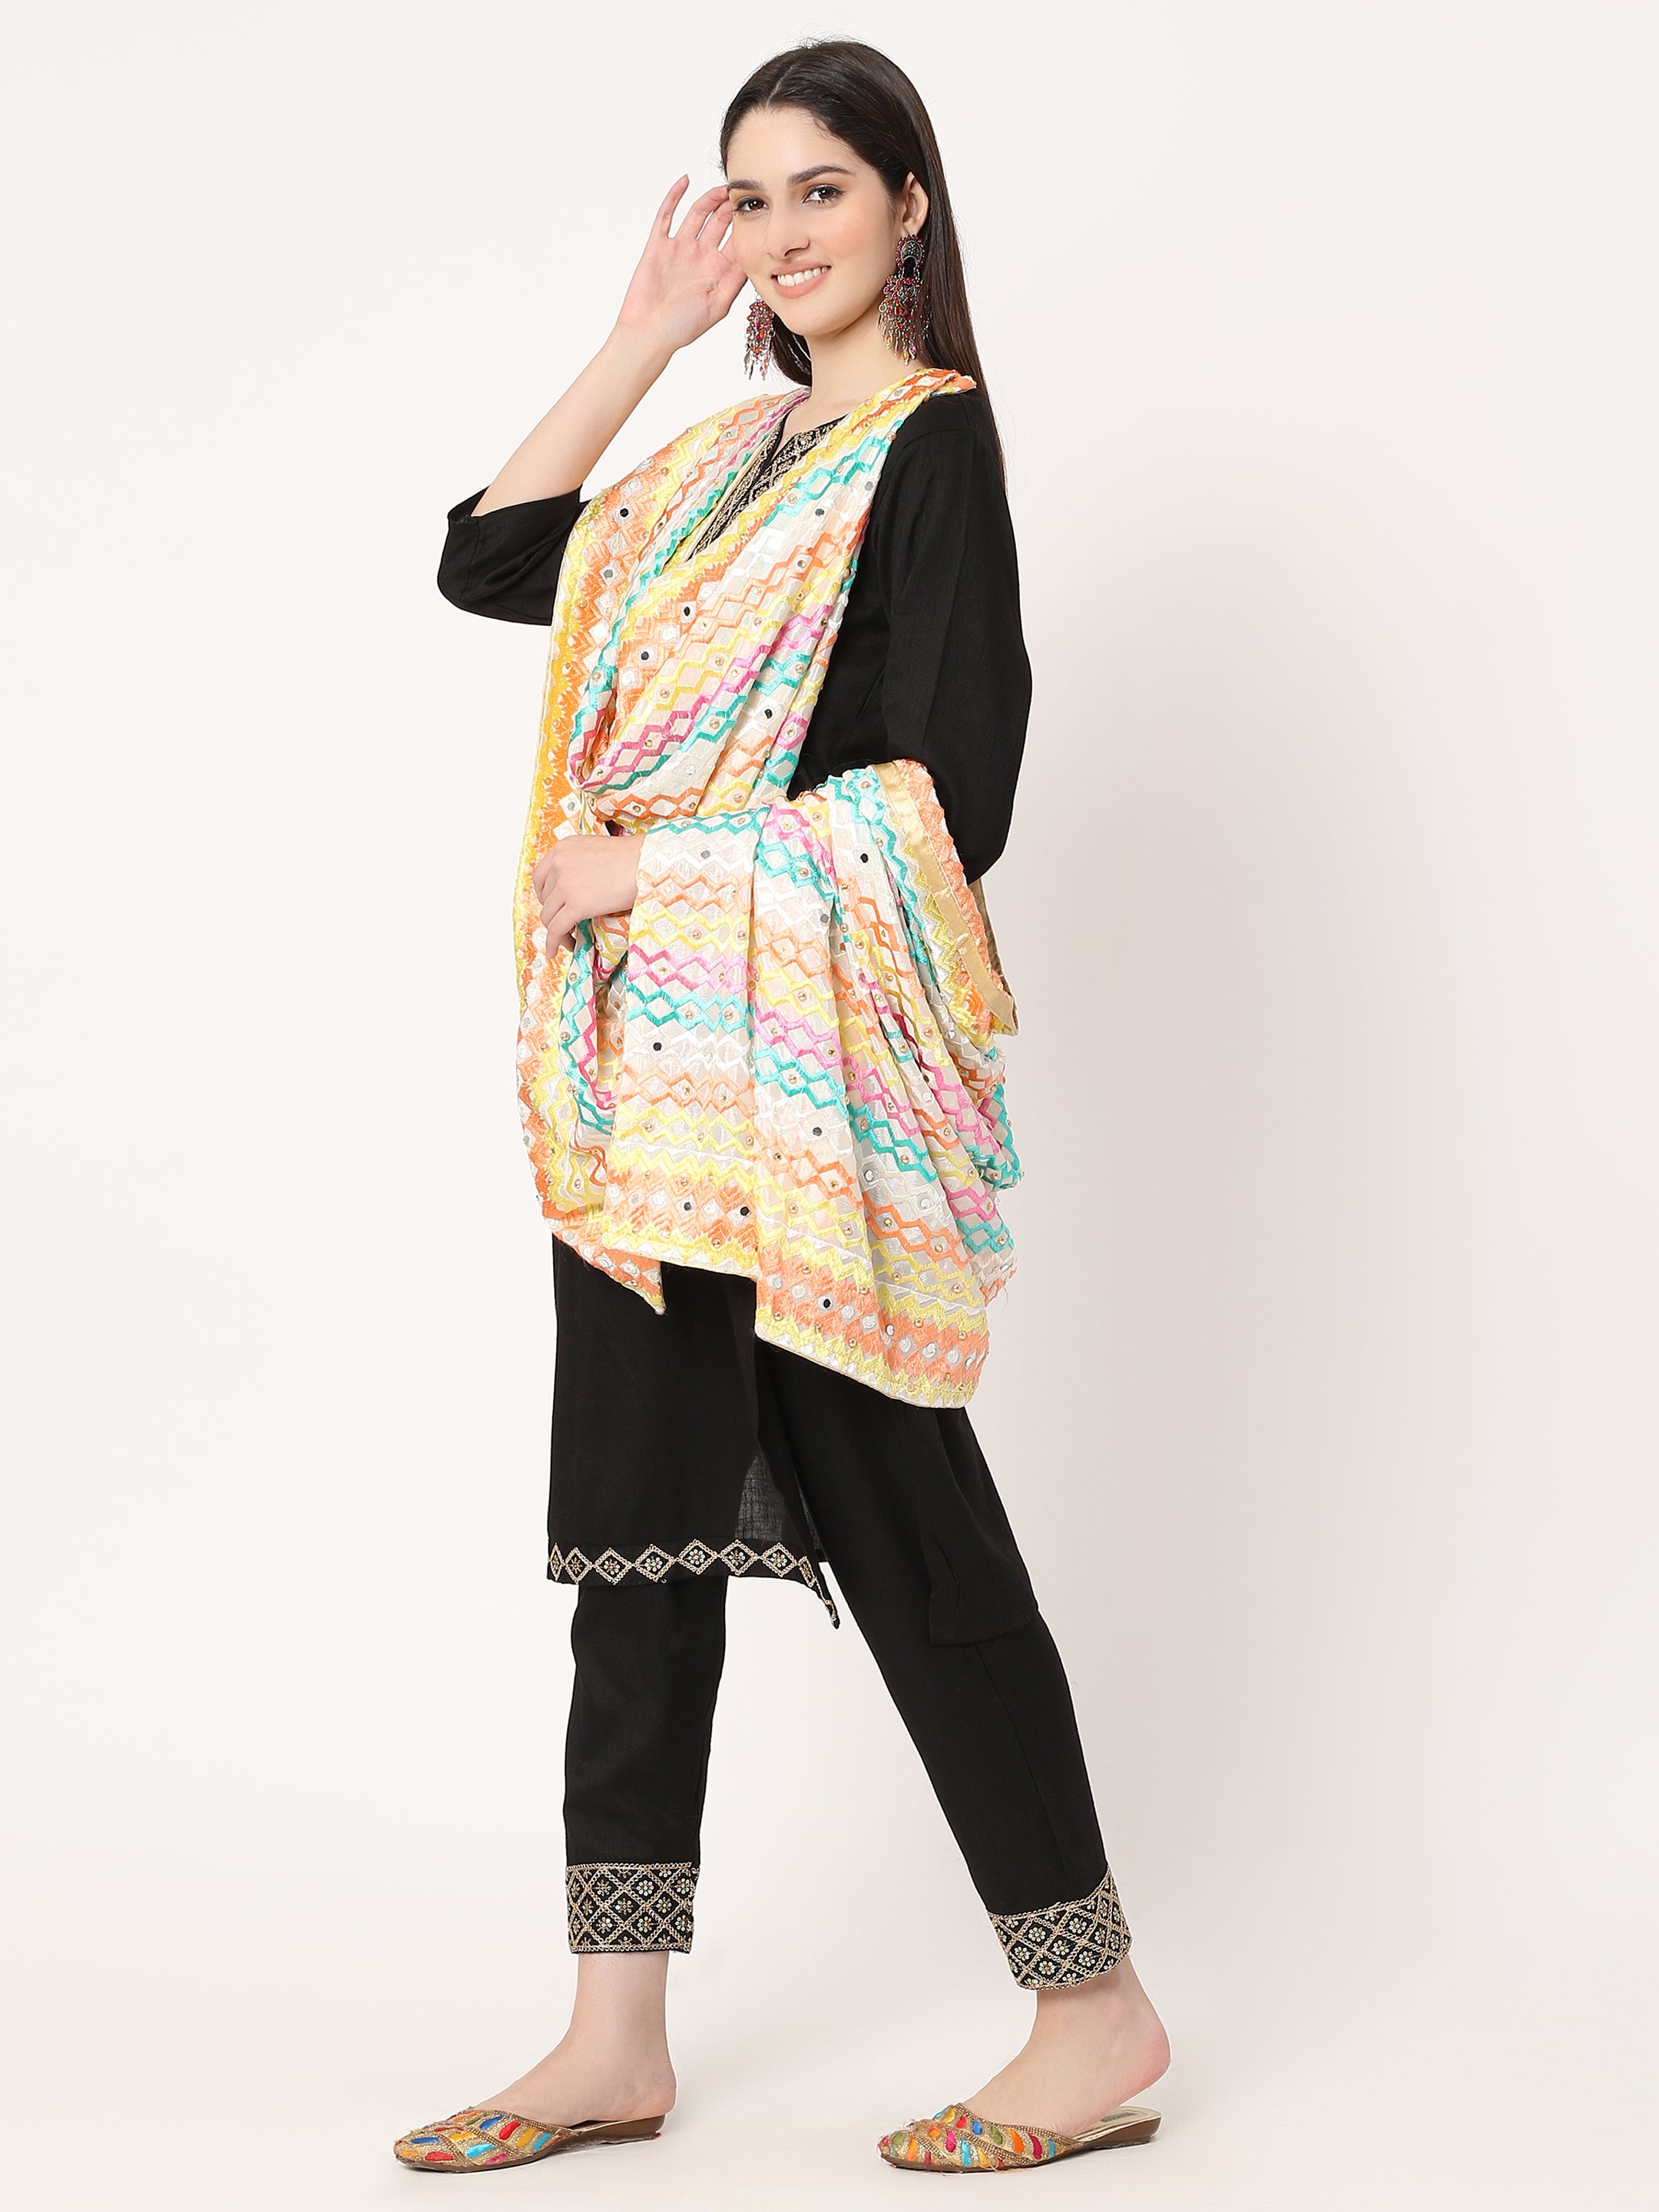 off-white-multicolour-embroidery-phulkari-dupatta-with-beads-and-pearl-mcrcpd0204-moda-chales-5